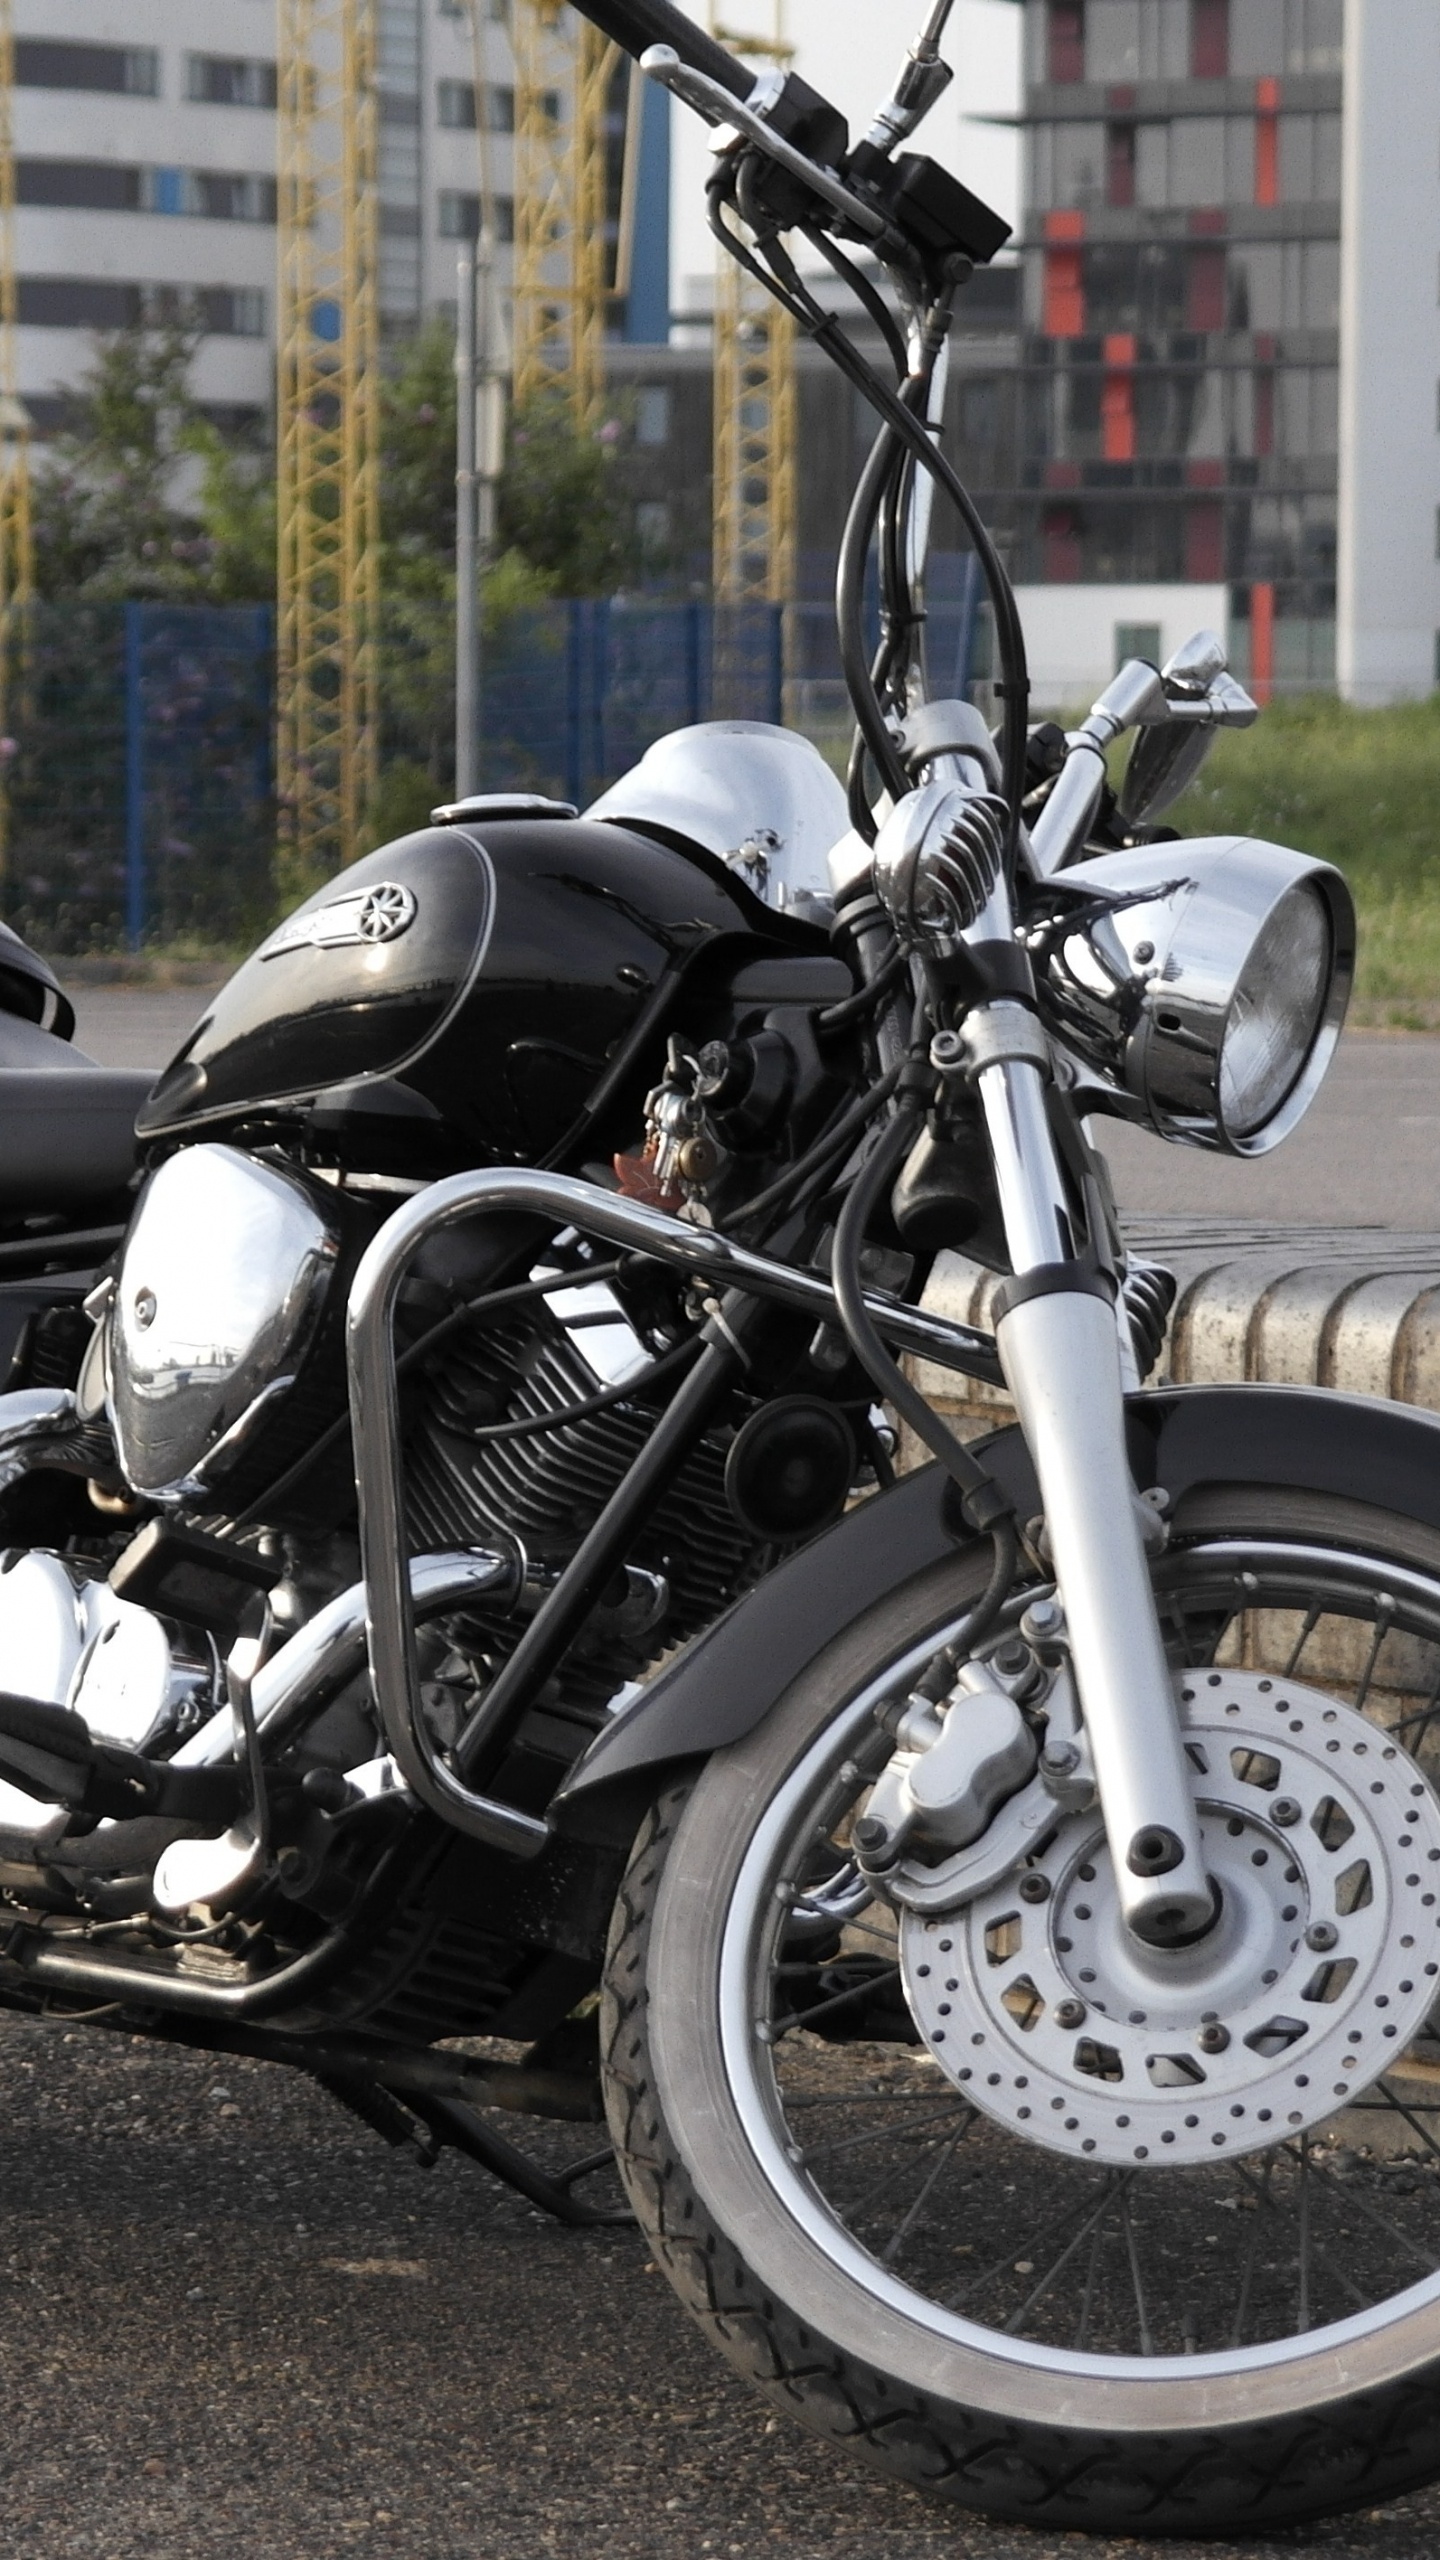 Black and Silver Cruiser Motorcycle on Road During Daytime. Wallpaper in 1440x2560 Resolution